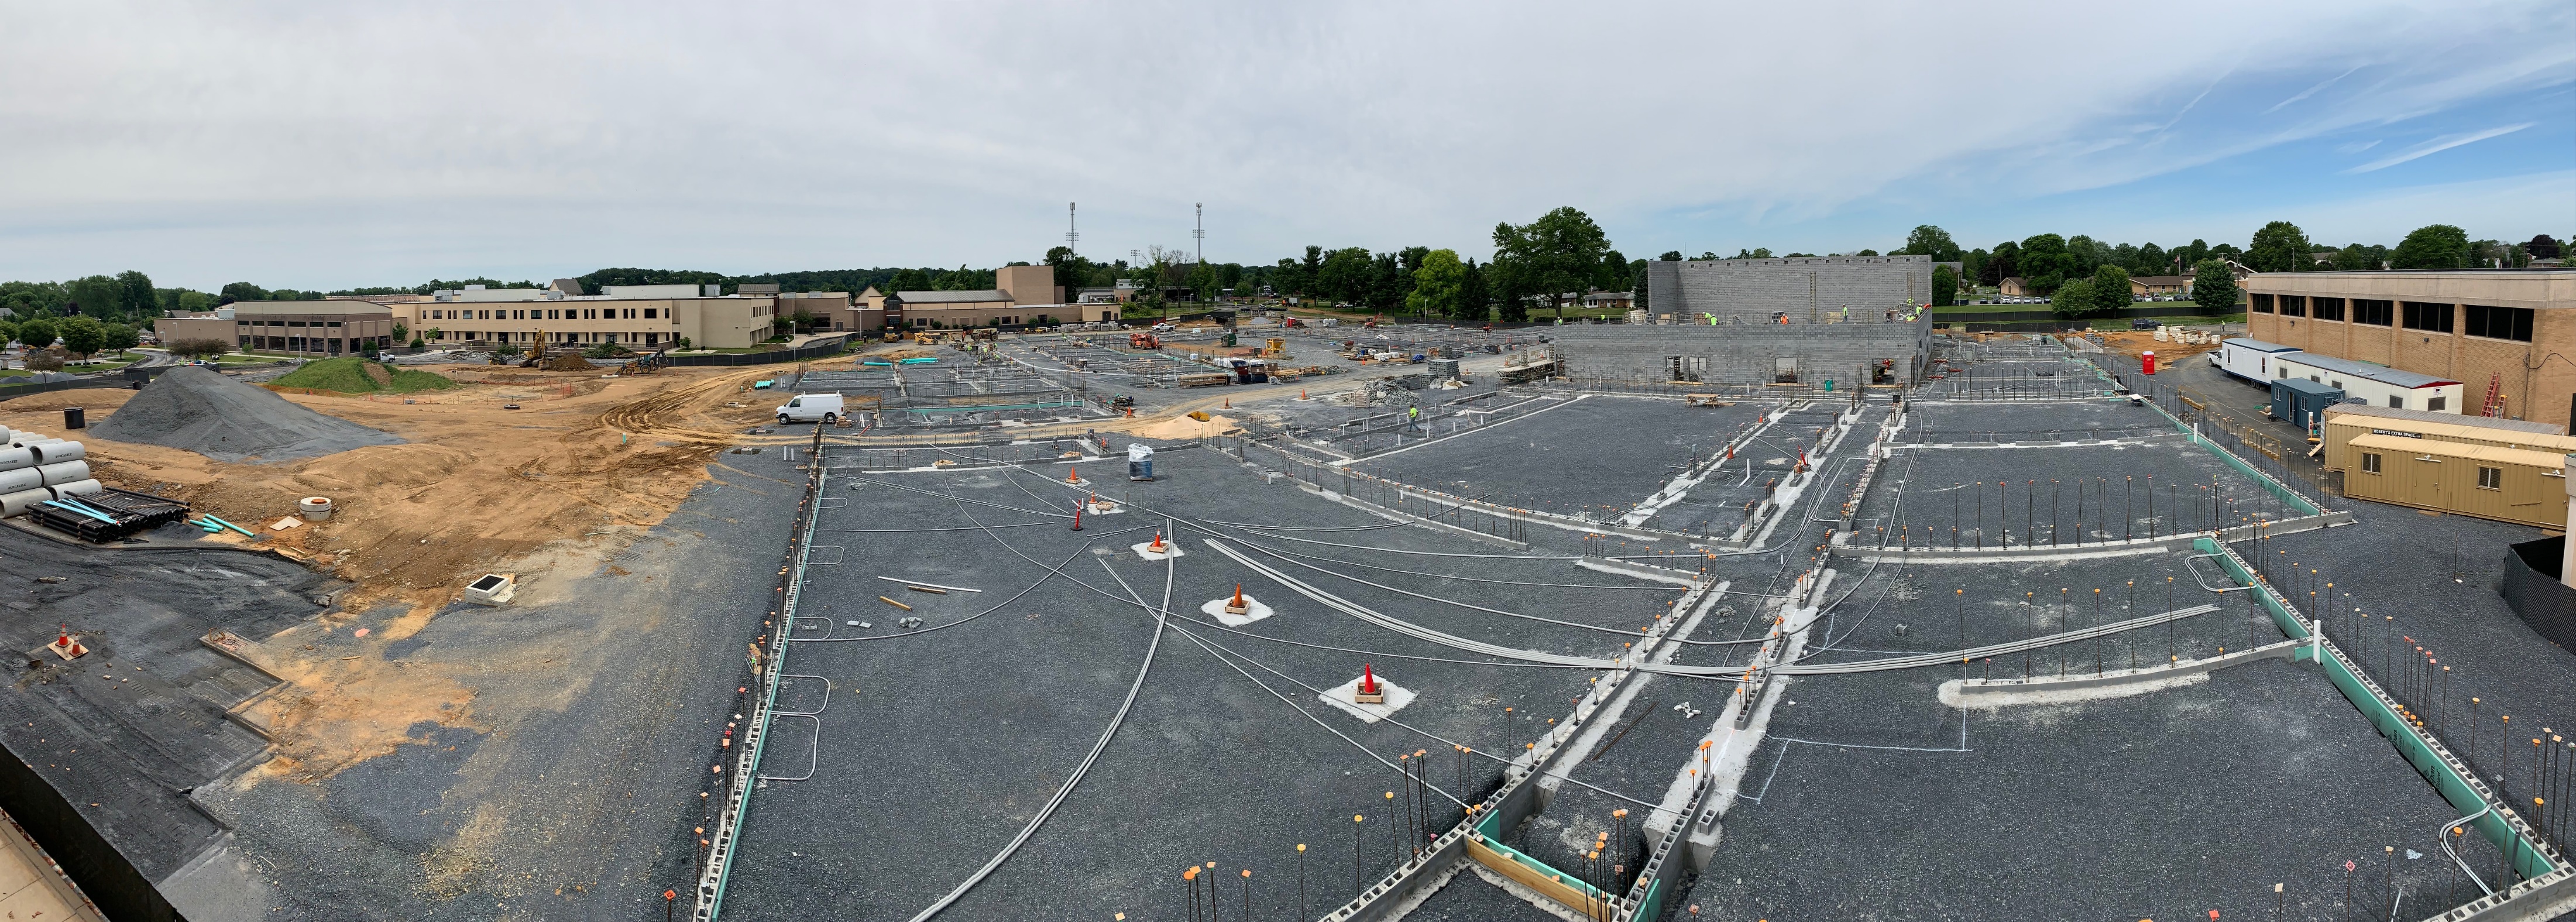 Panorama of Construction Site